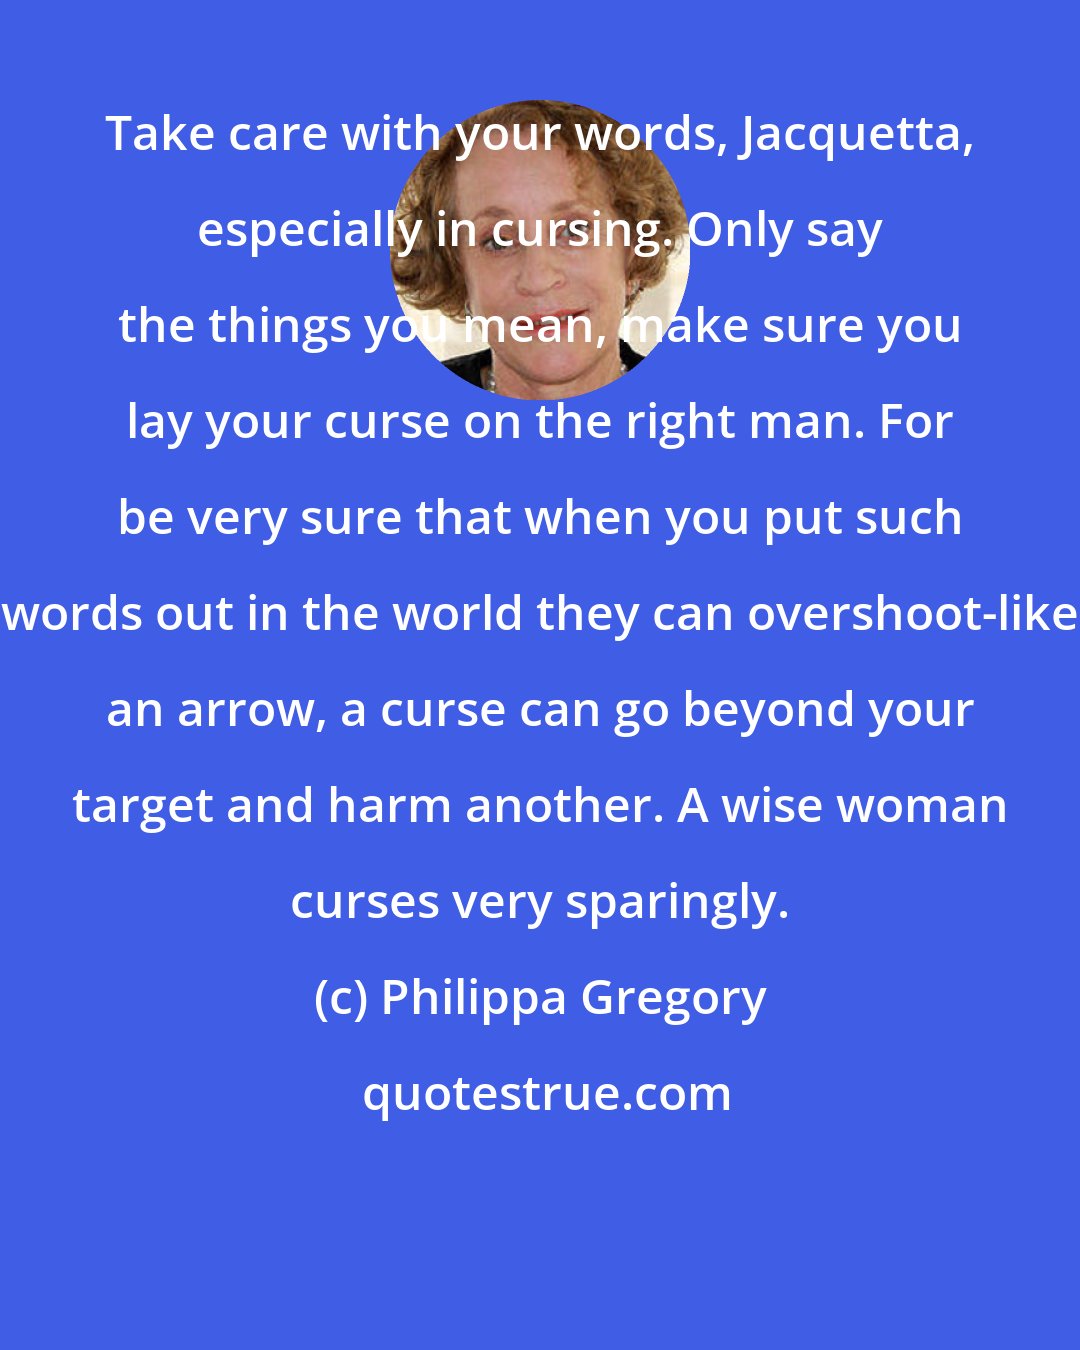 Philippa Gregory: Take care with your words, Jacquetta, especially in cursing. Only say the things you mean, make sure you lay your curse on the right man. For be very sure that when you put such words out in the world they can overshoot-like an arrow, a curse can go beyond your target and harm another. A wise woman curses very sparingly.